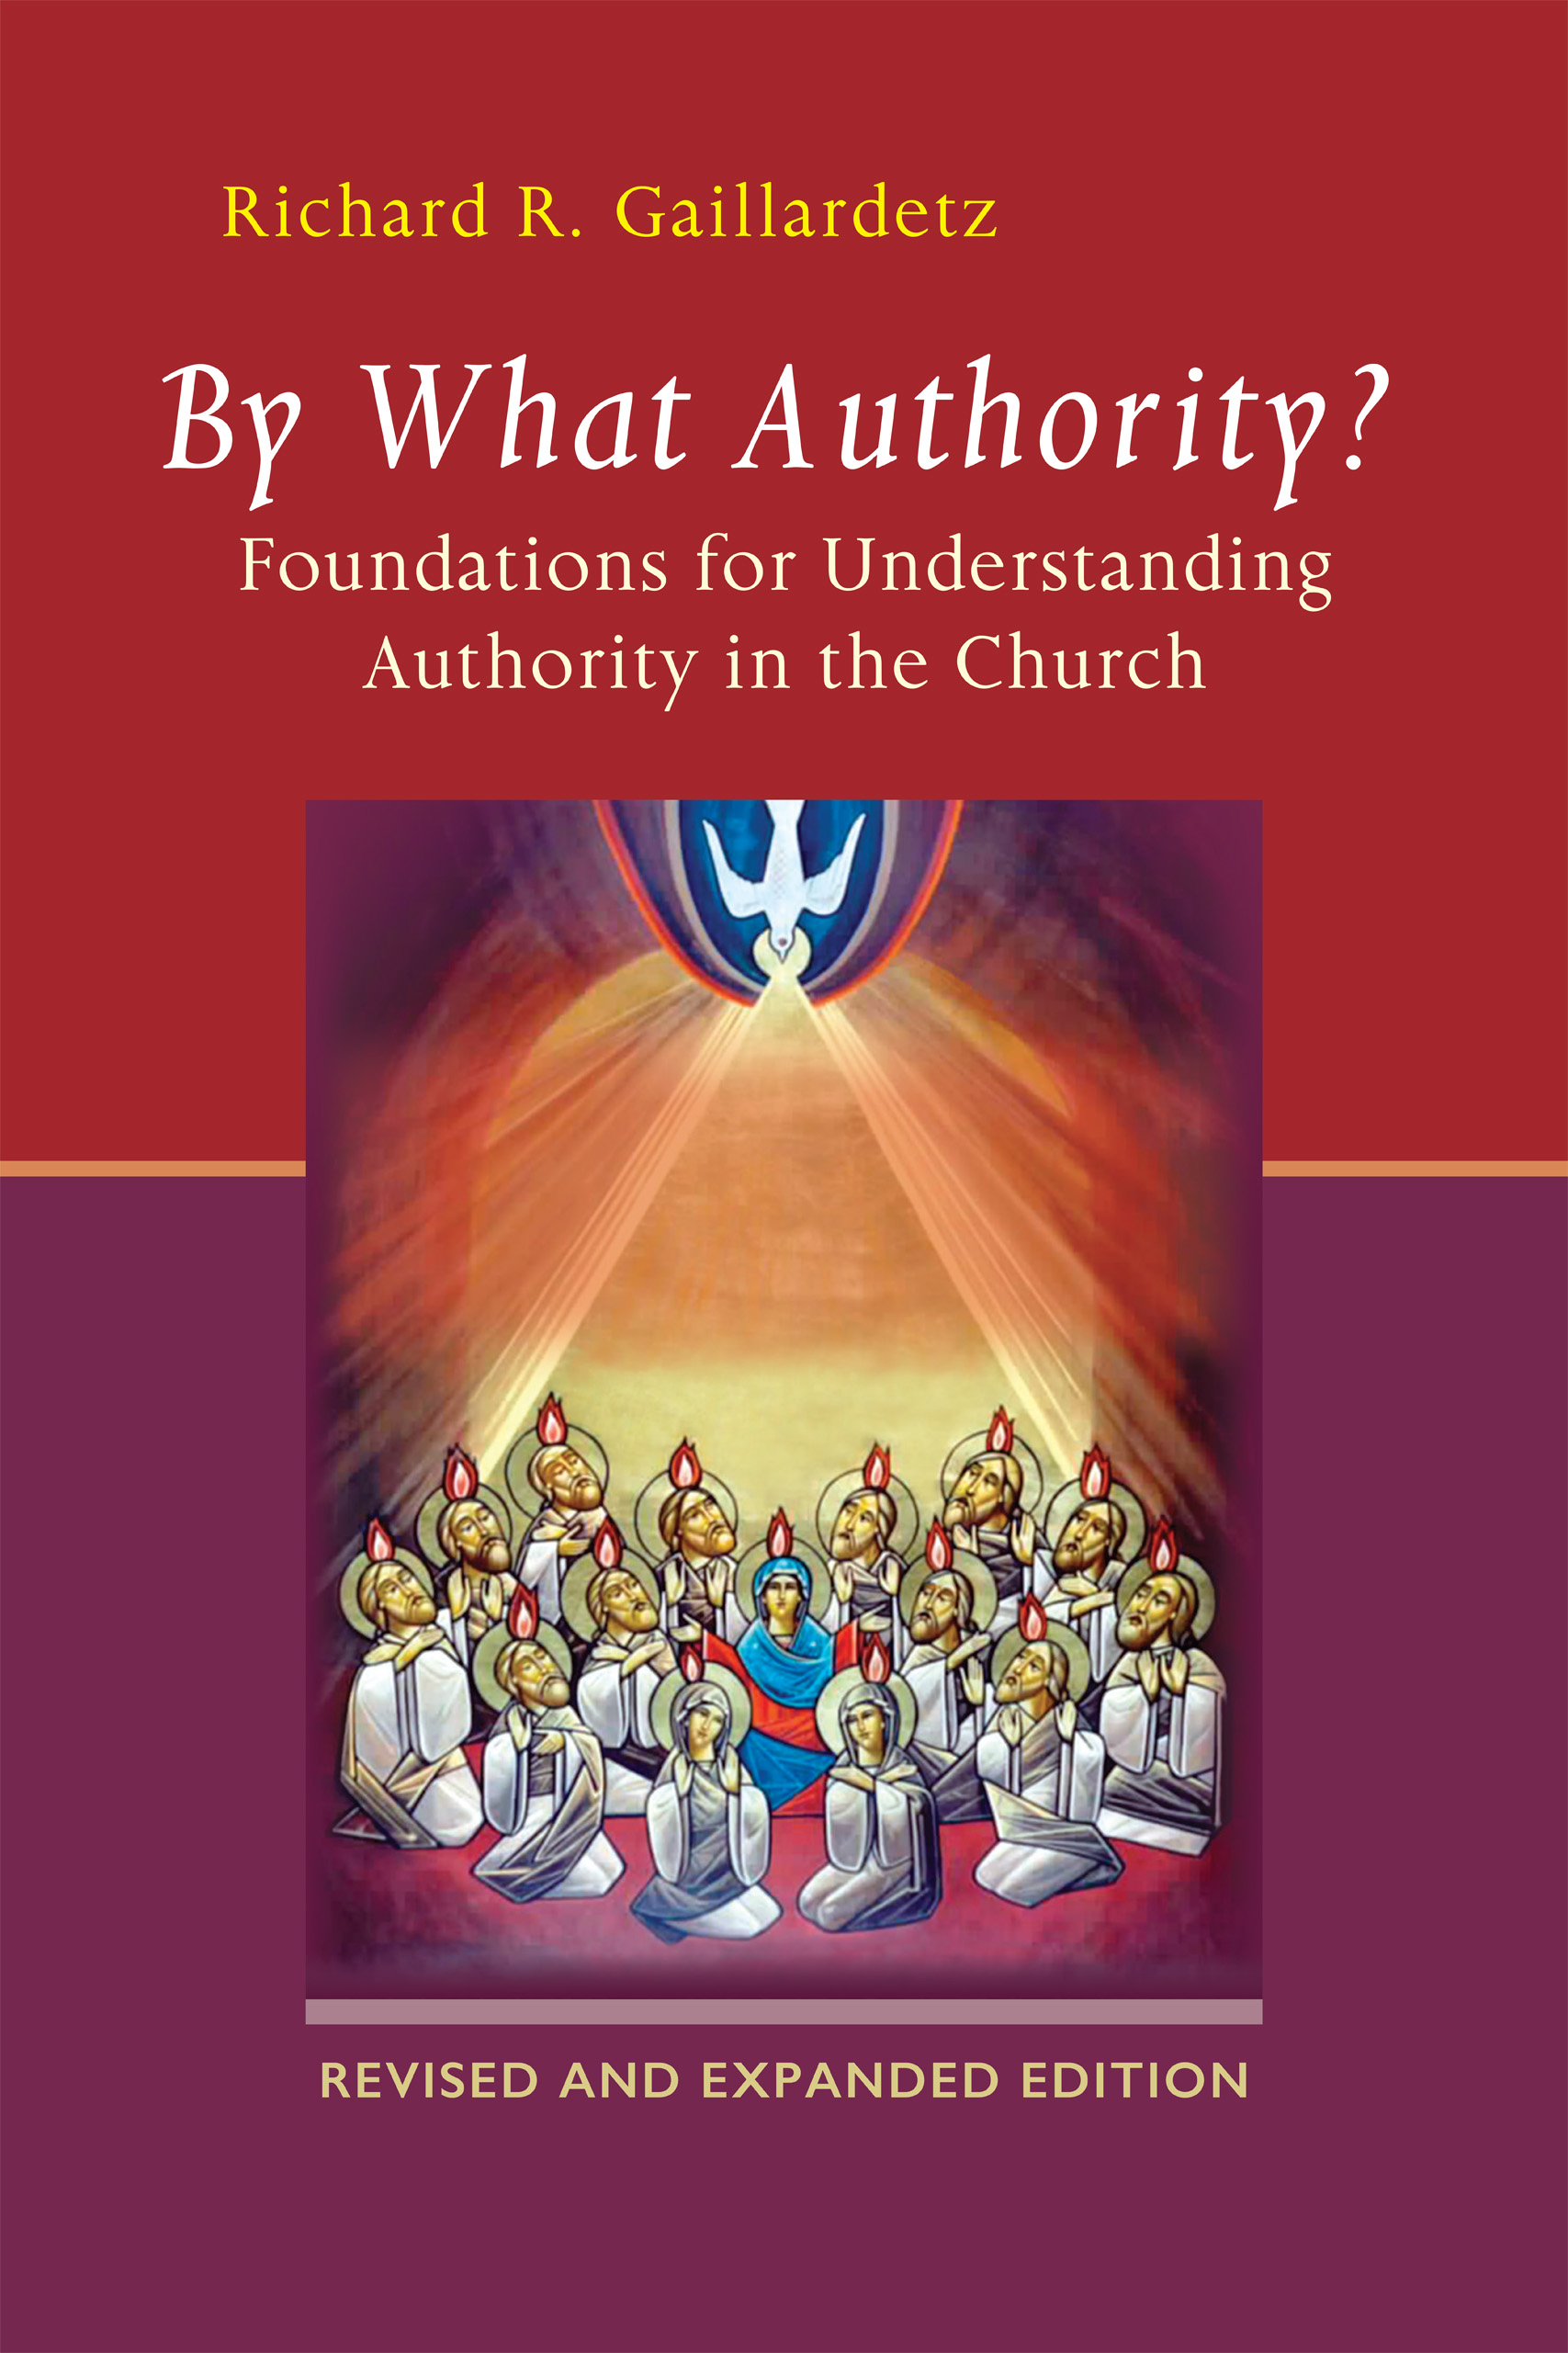 By What Authority? - 15-24.99